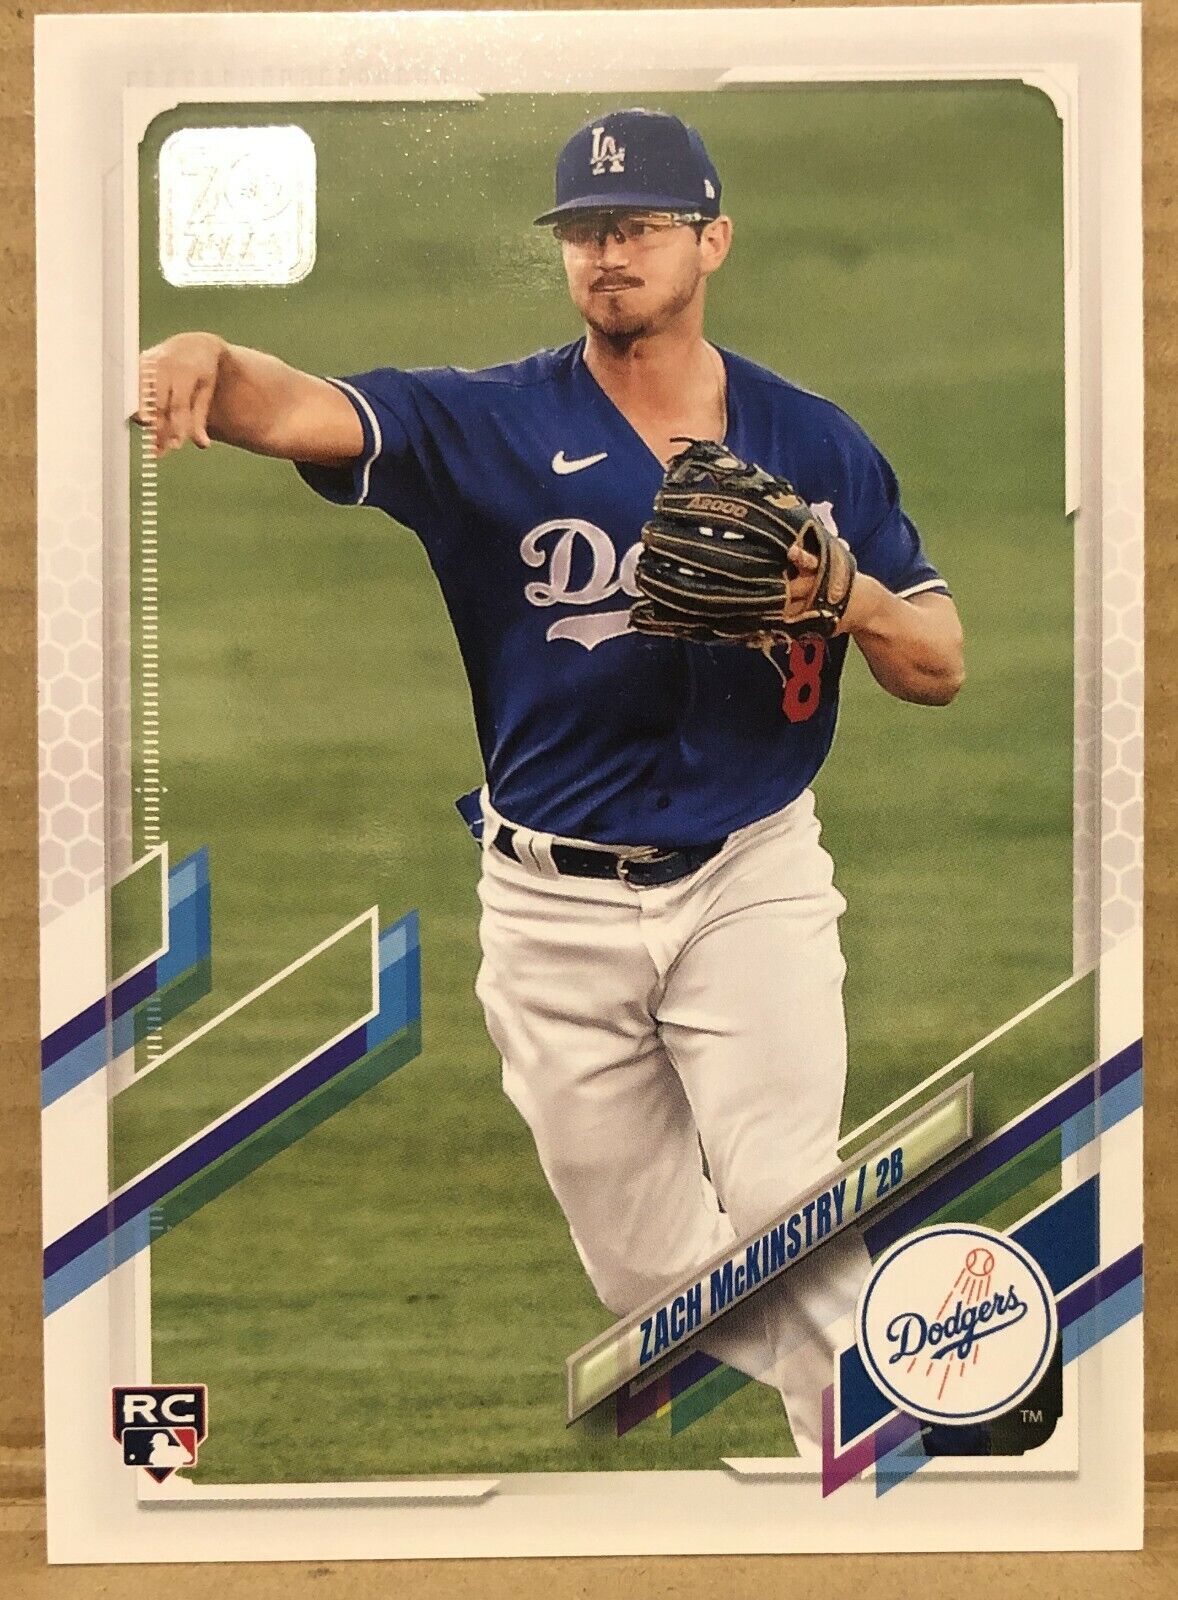 ZACH McKINSTRY(LOS ANGELES DODGERS)2021 TOPPS ROOKIE BASEBALL CARD